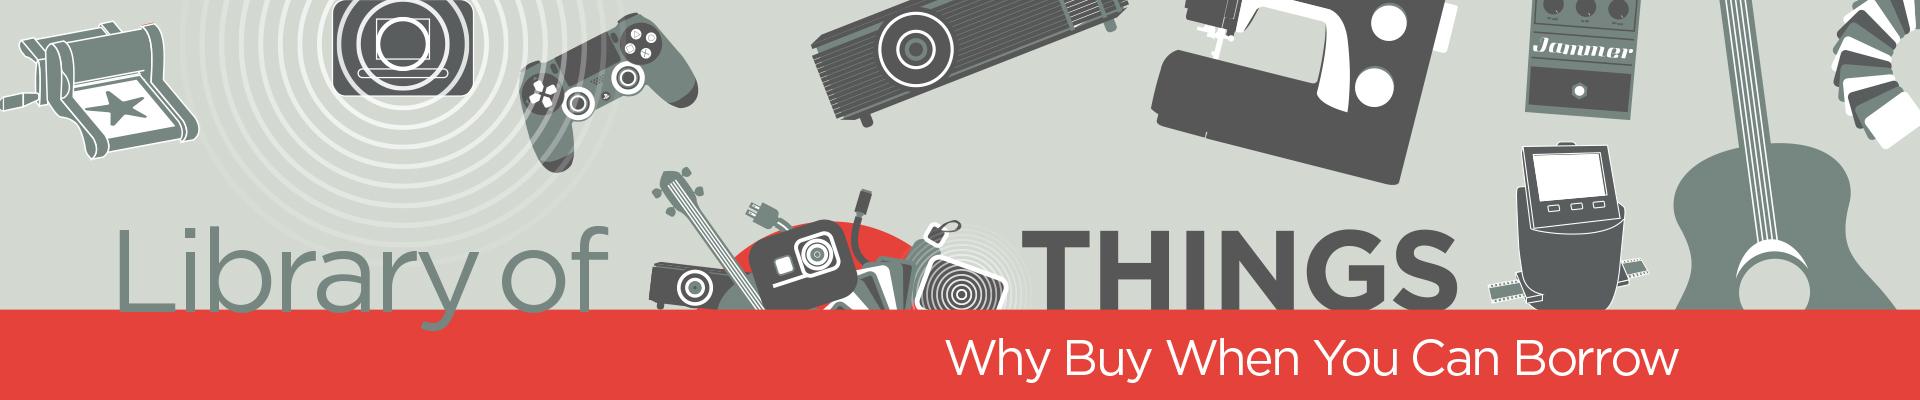 Library of Things: Why Buy When You Can Borrow